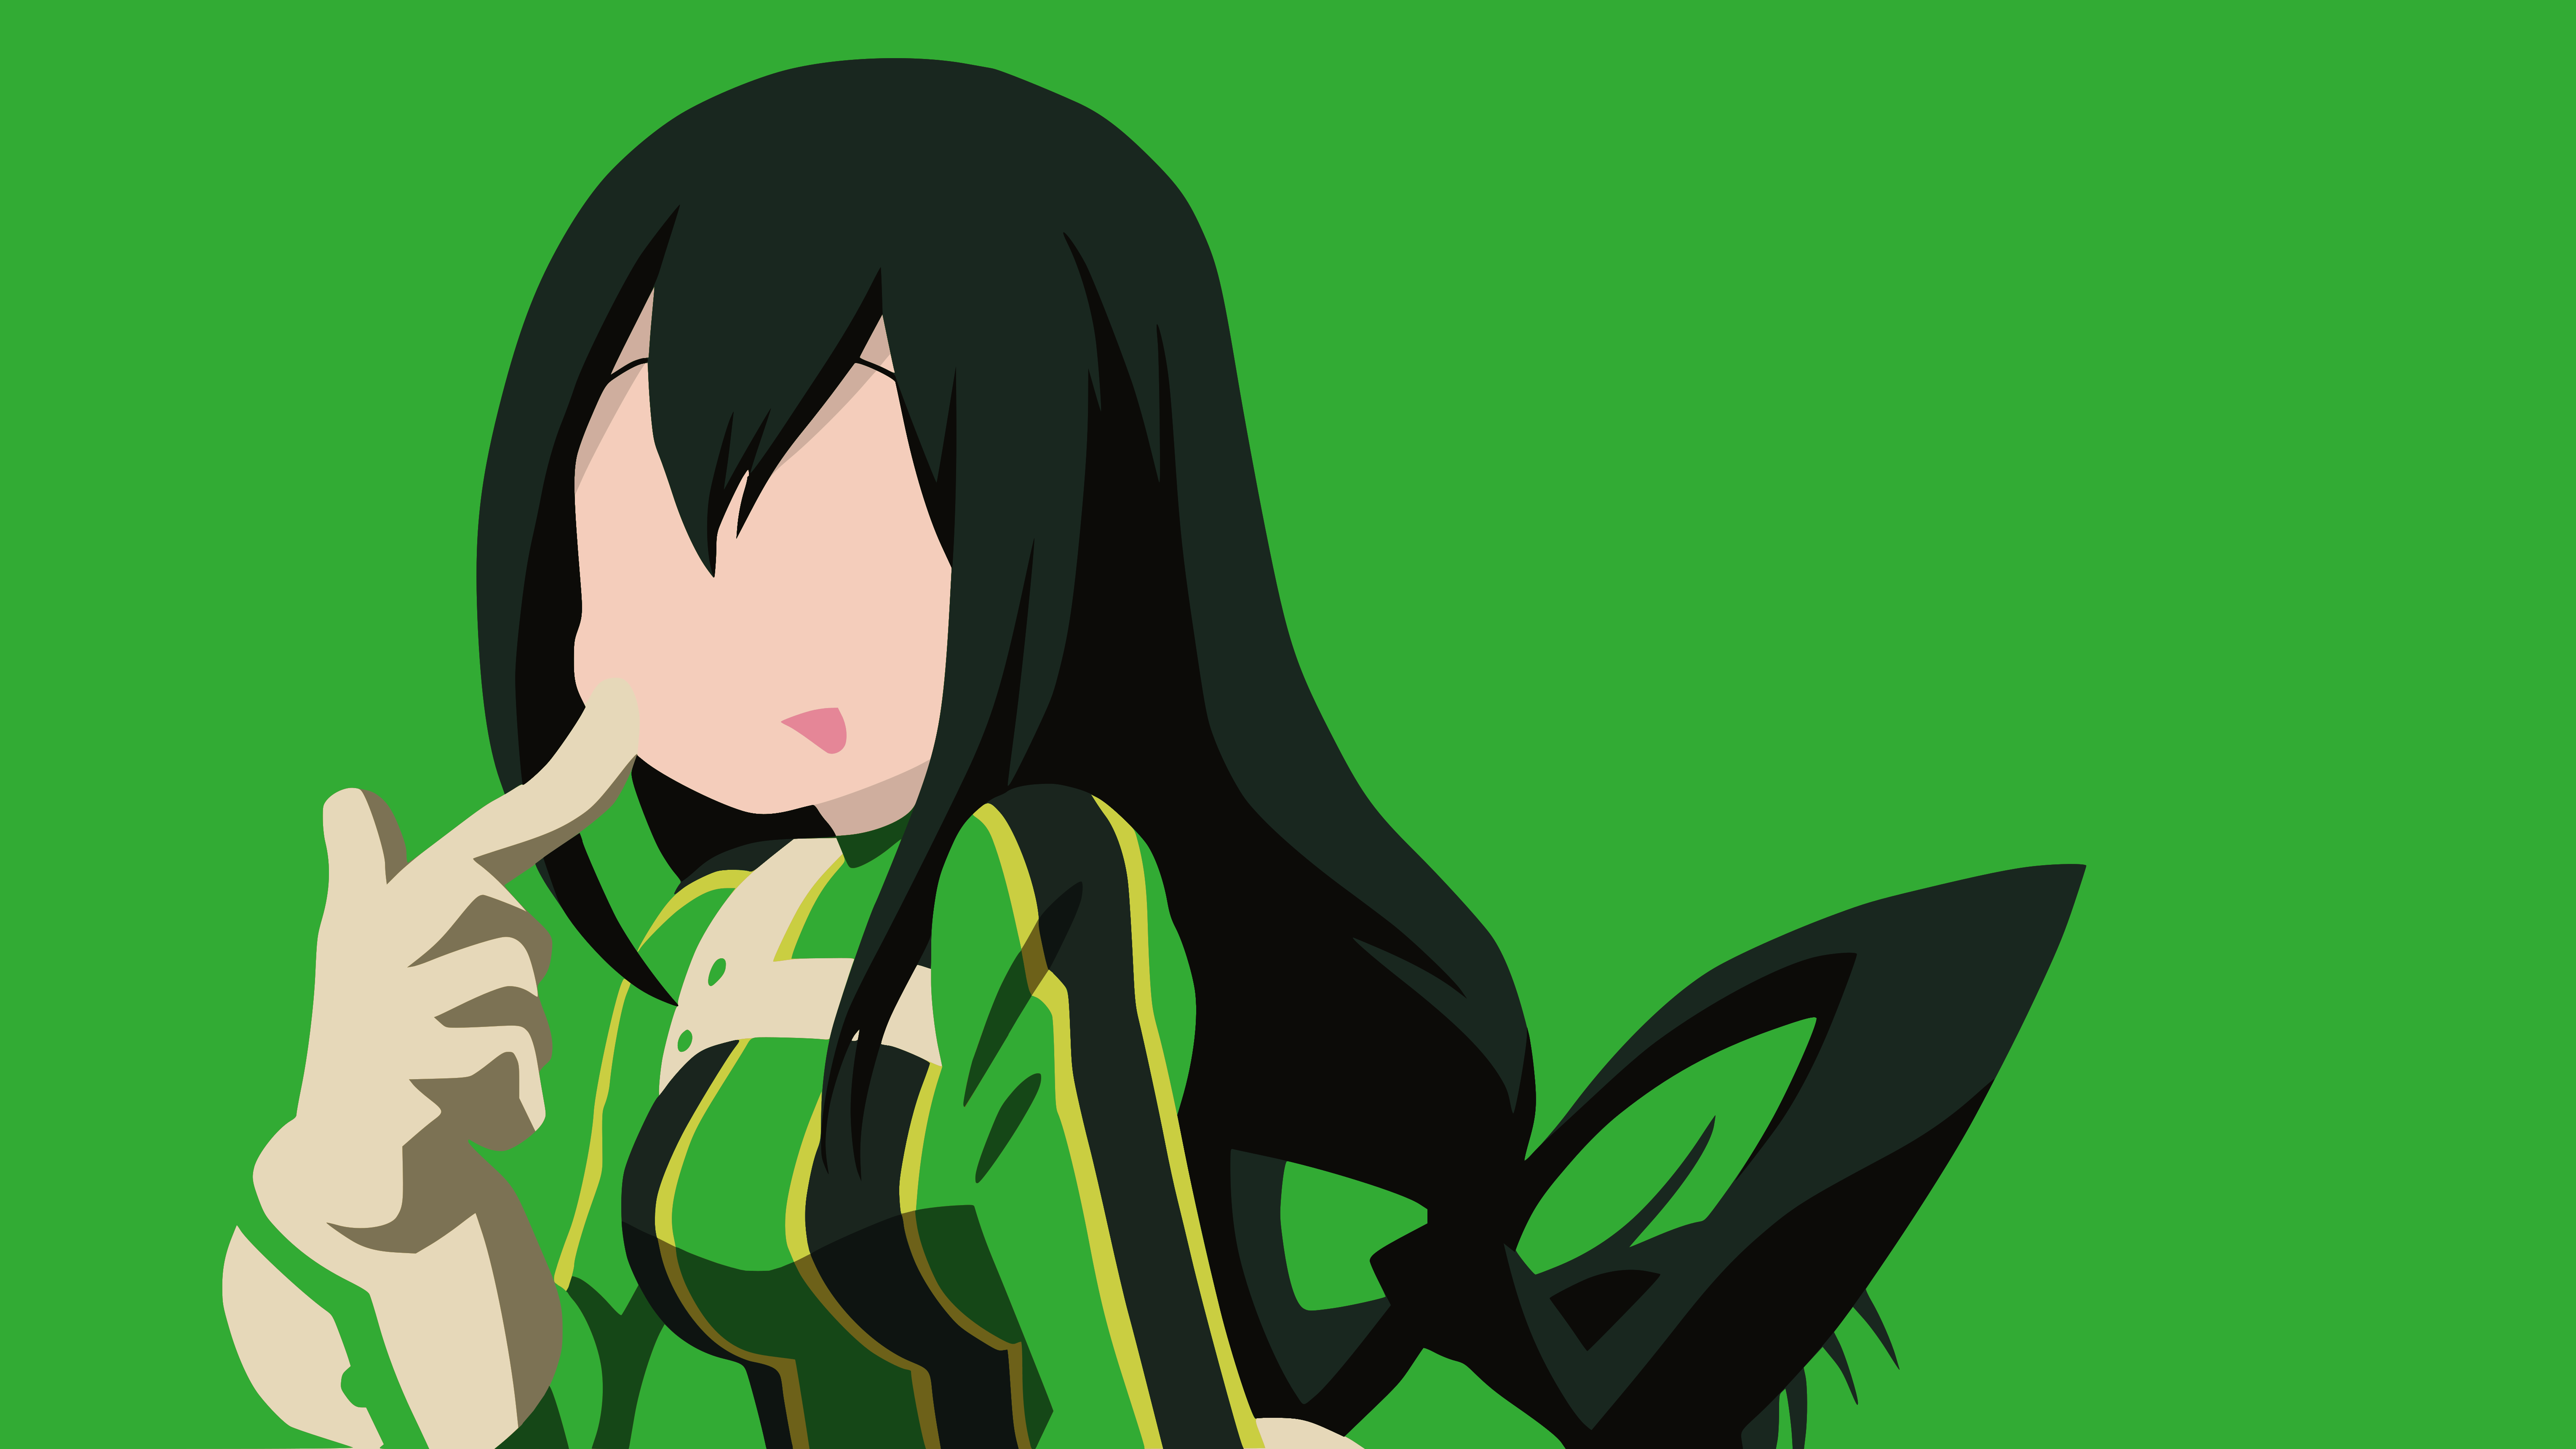 Bnha Froppy Wallpapers on WallpaperDog.